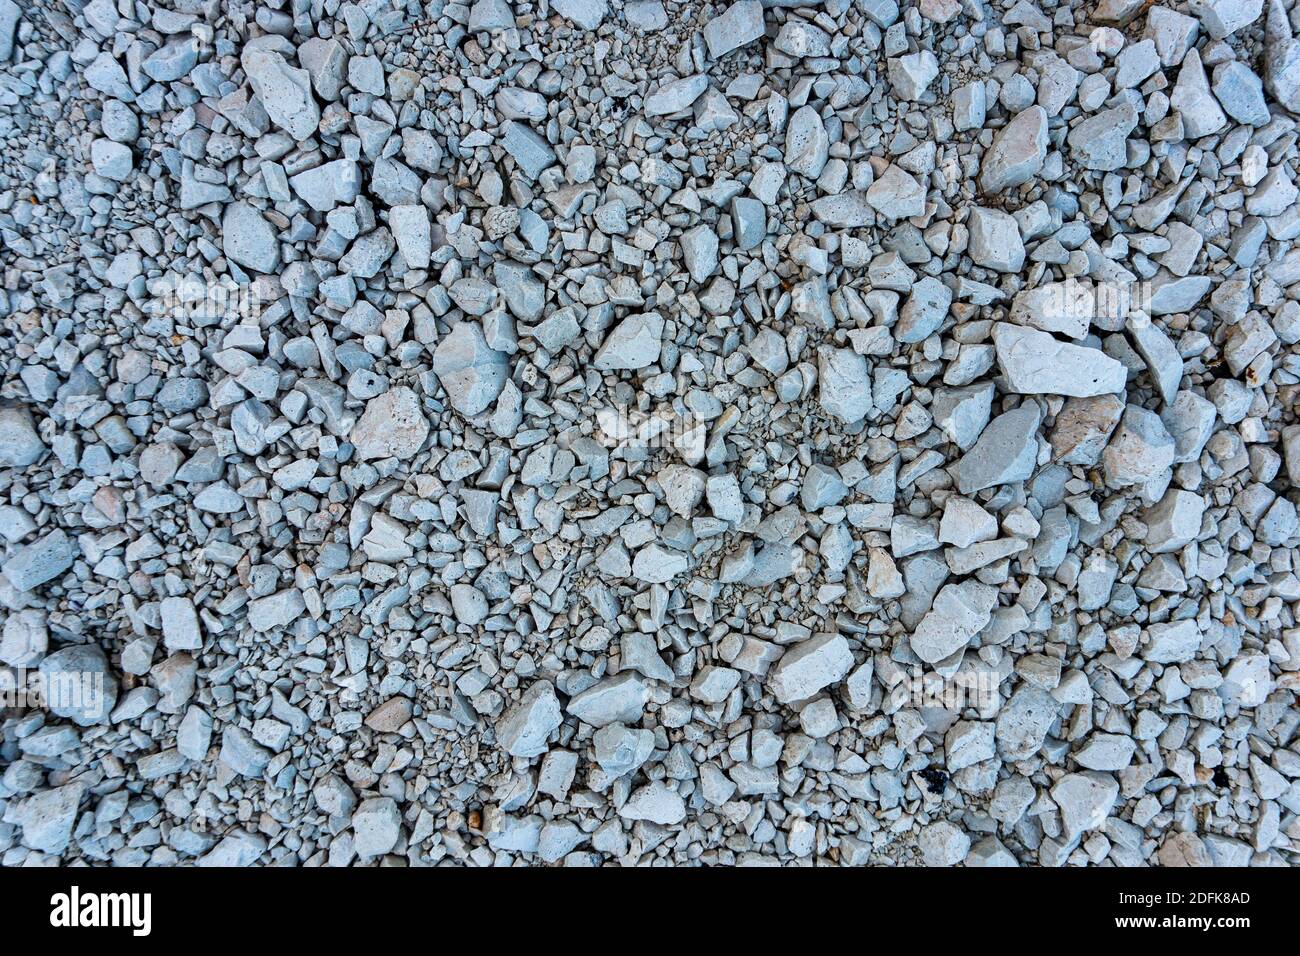 Close up of white stones and gravel on the ground Stock Photo